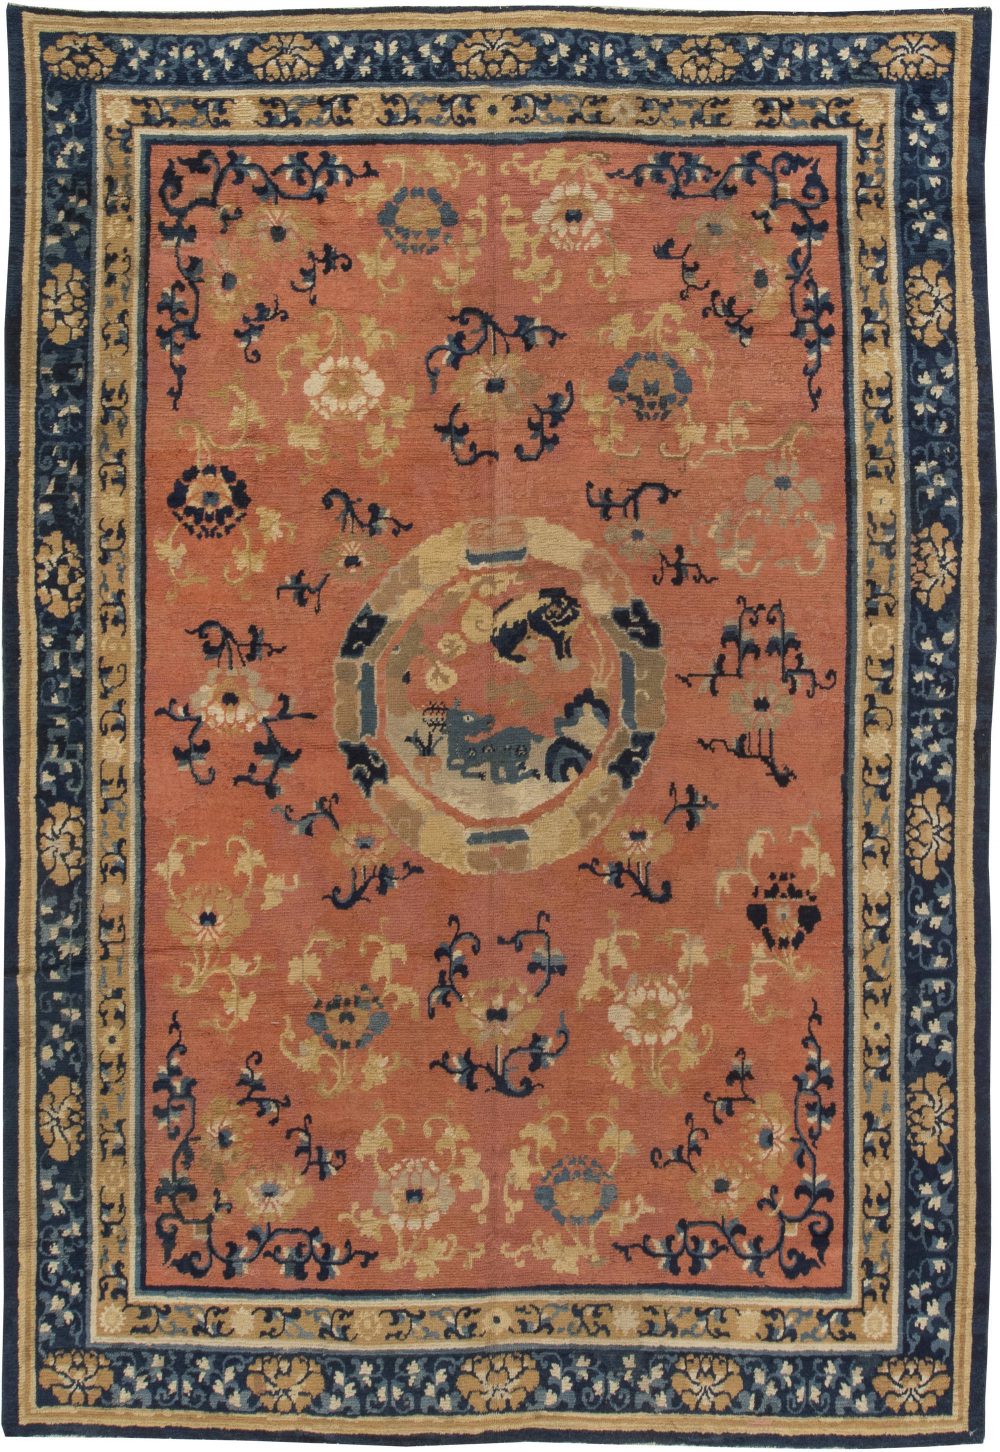 19th Century Chinese Handmade Wool Carpet in Salmon and Cobalt Blue Shades BB2794